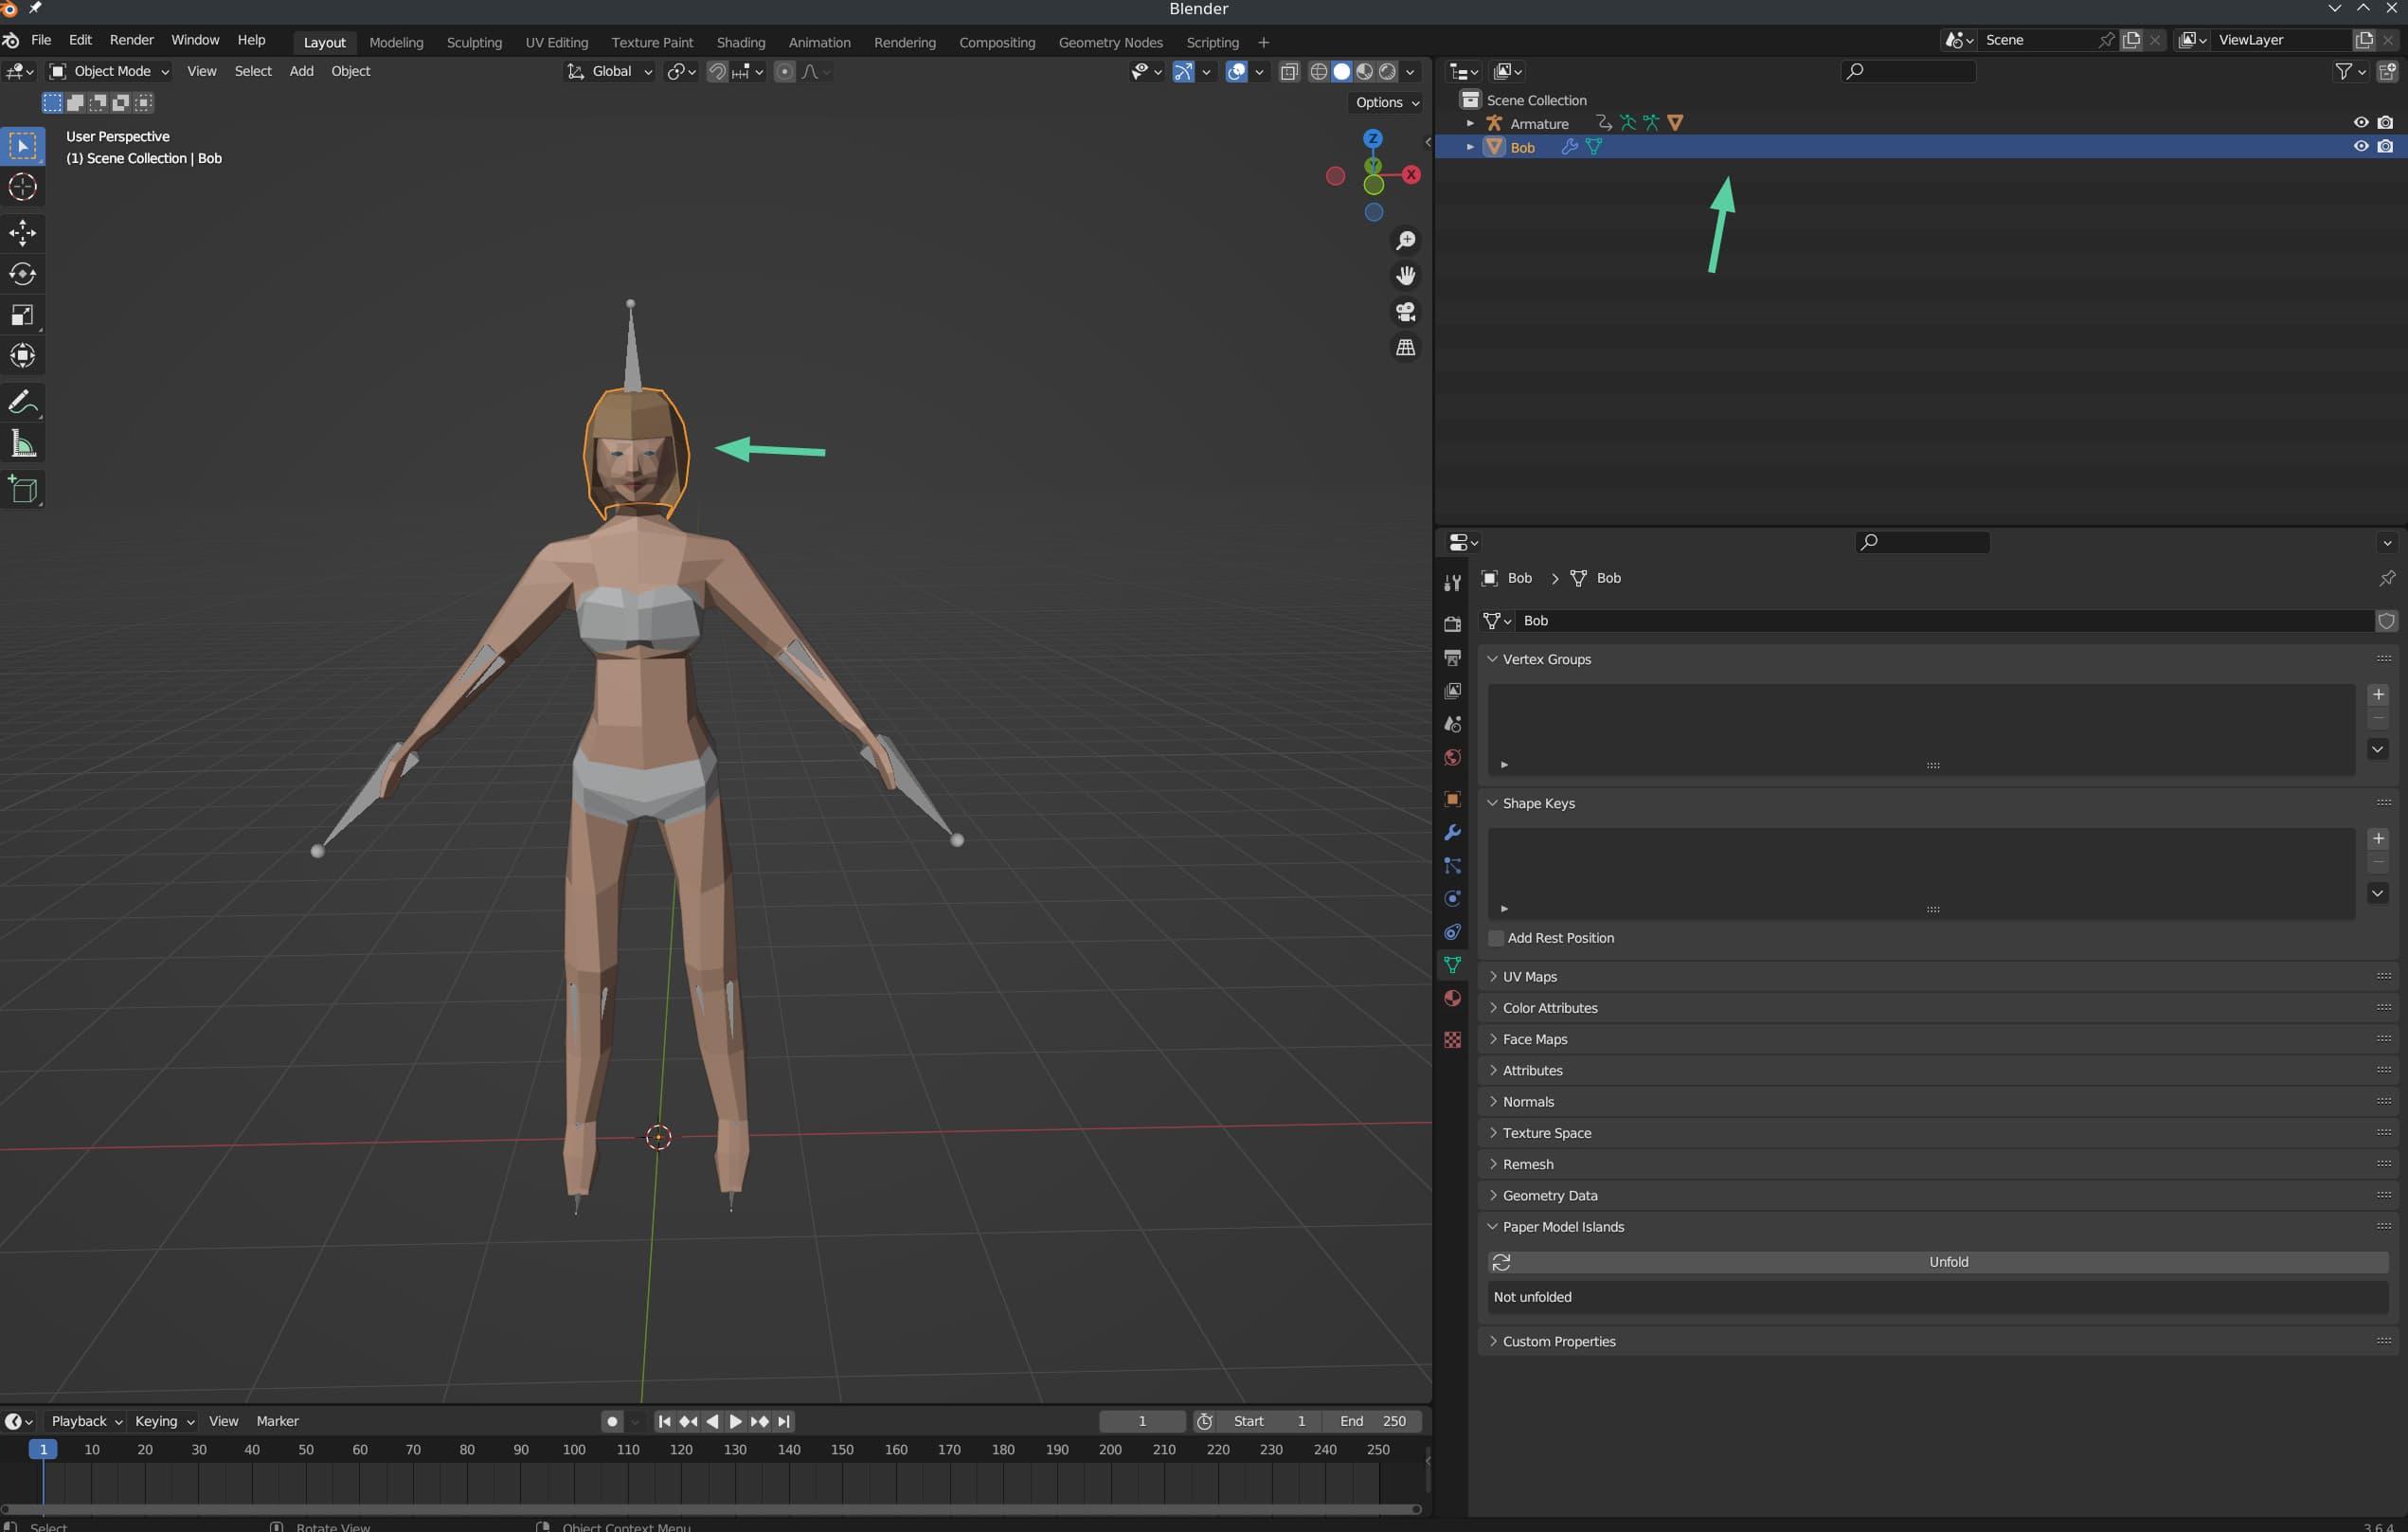 Blender screenshot, showing how to click on the Bob hairstyle, and see it highlighted